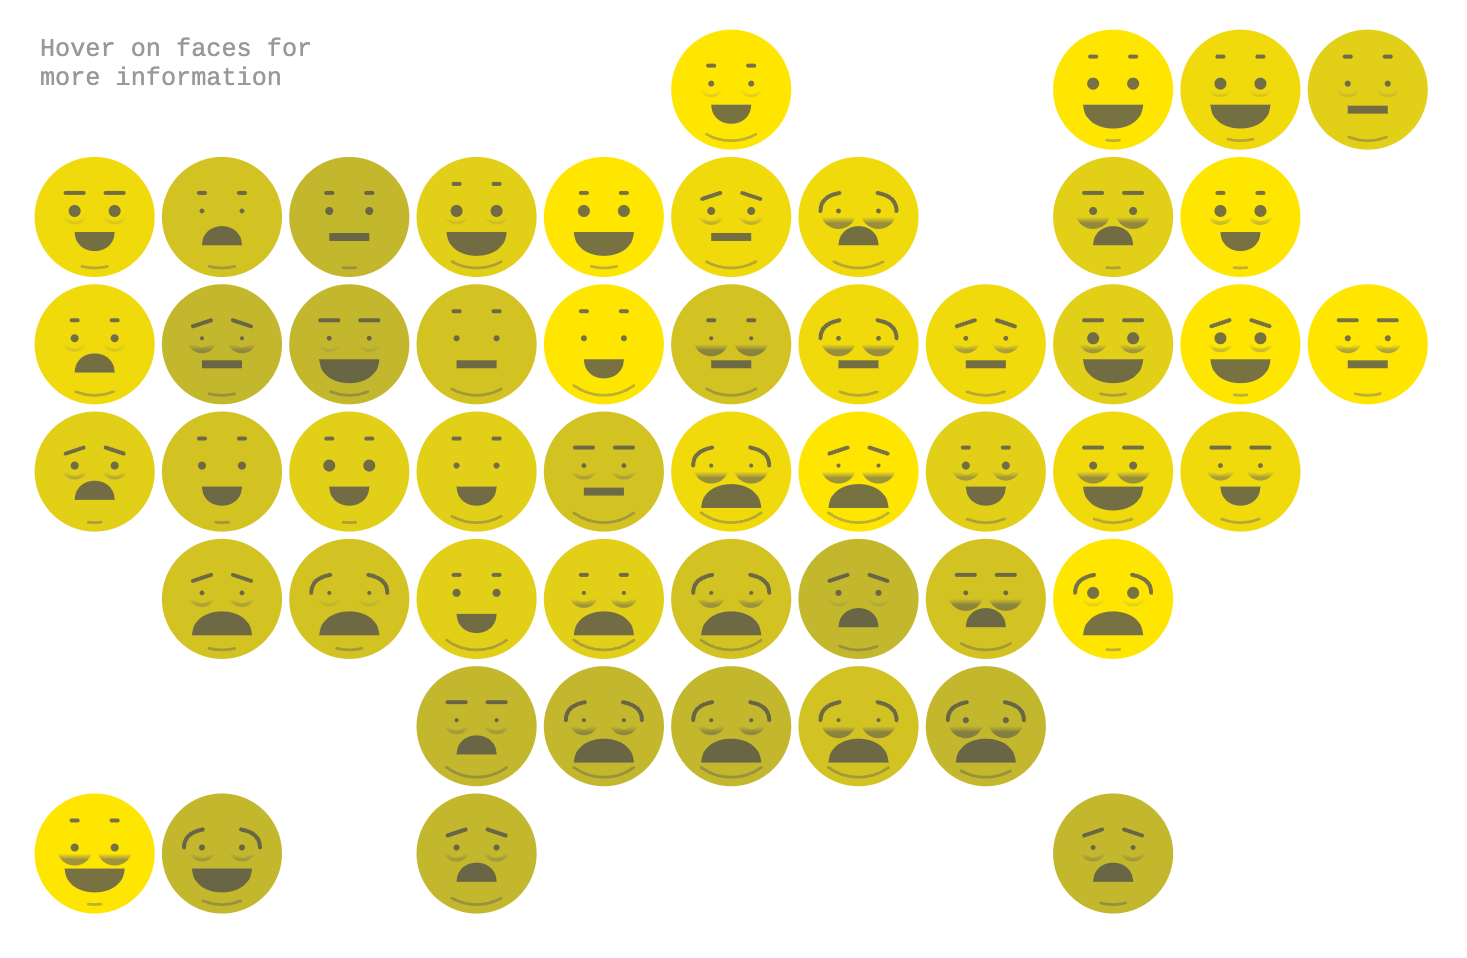 A USA map made of yellow emojis with various facial expressions is displayed; the text "Hover on faces for more information" is on the top left.